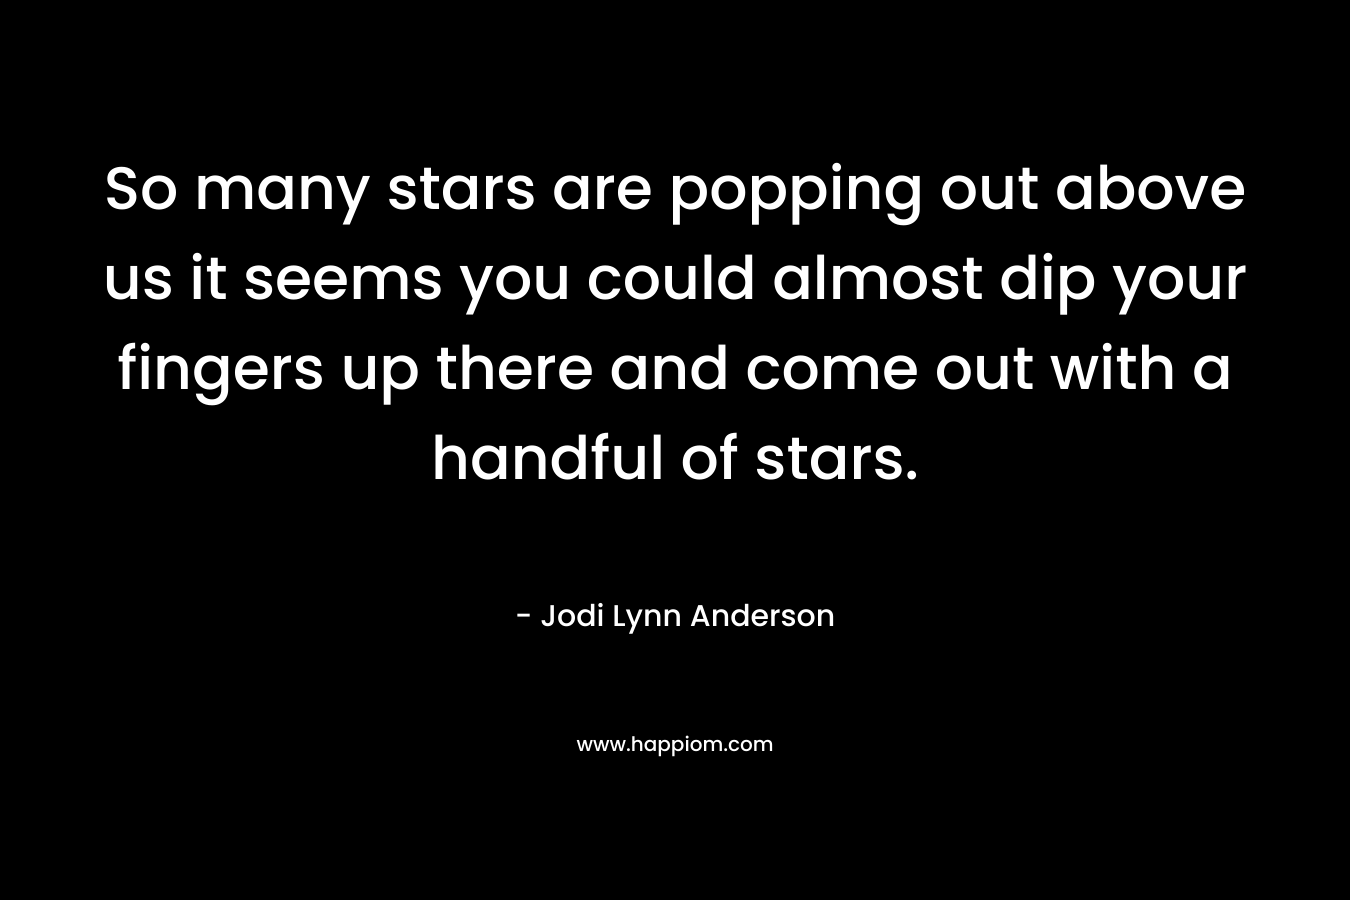 So many stars are popping out above us it seems you could almost dip your fingers up there and come out with a handful of stars.